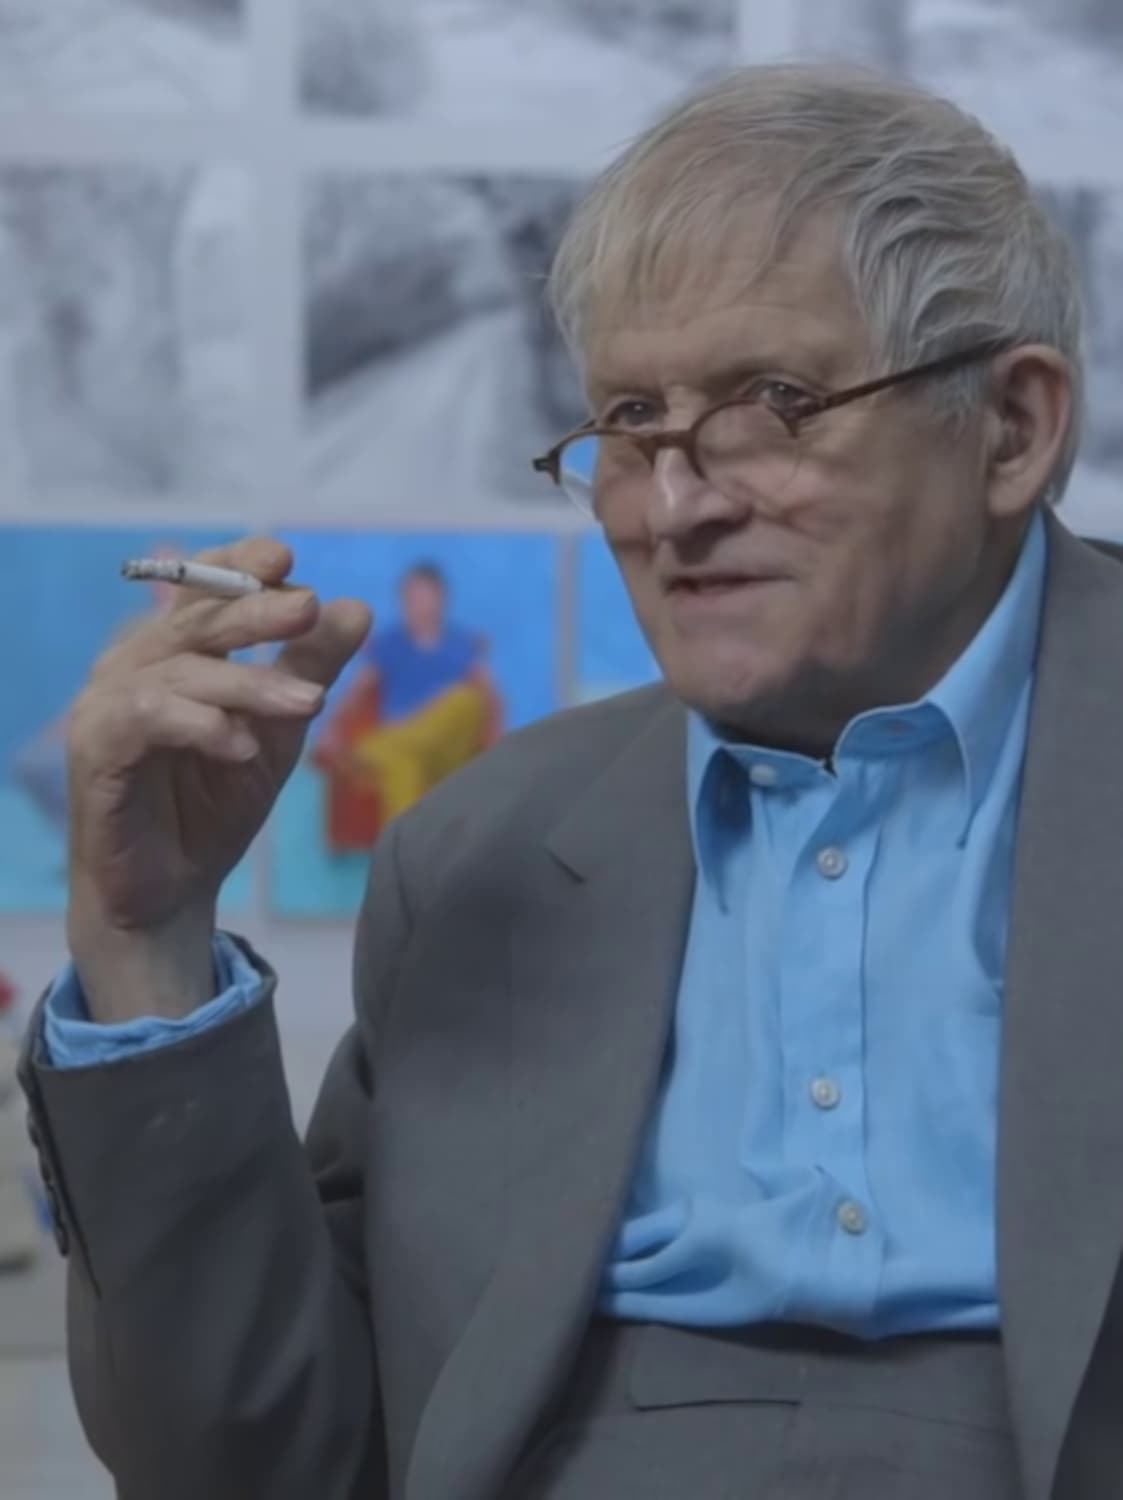 David Hockney in the Now: In Six Minutes